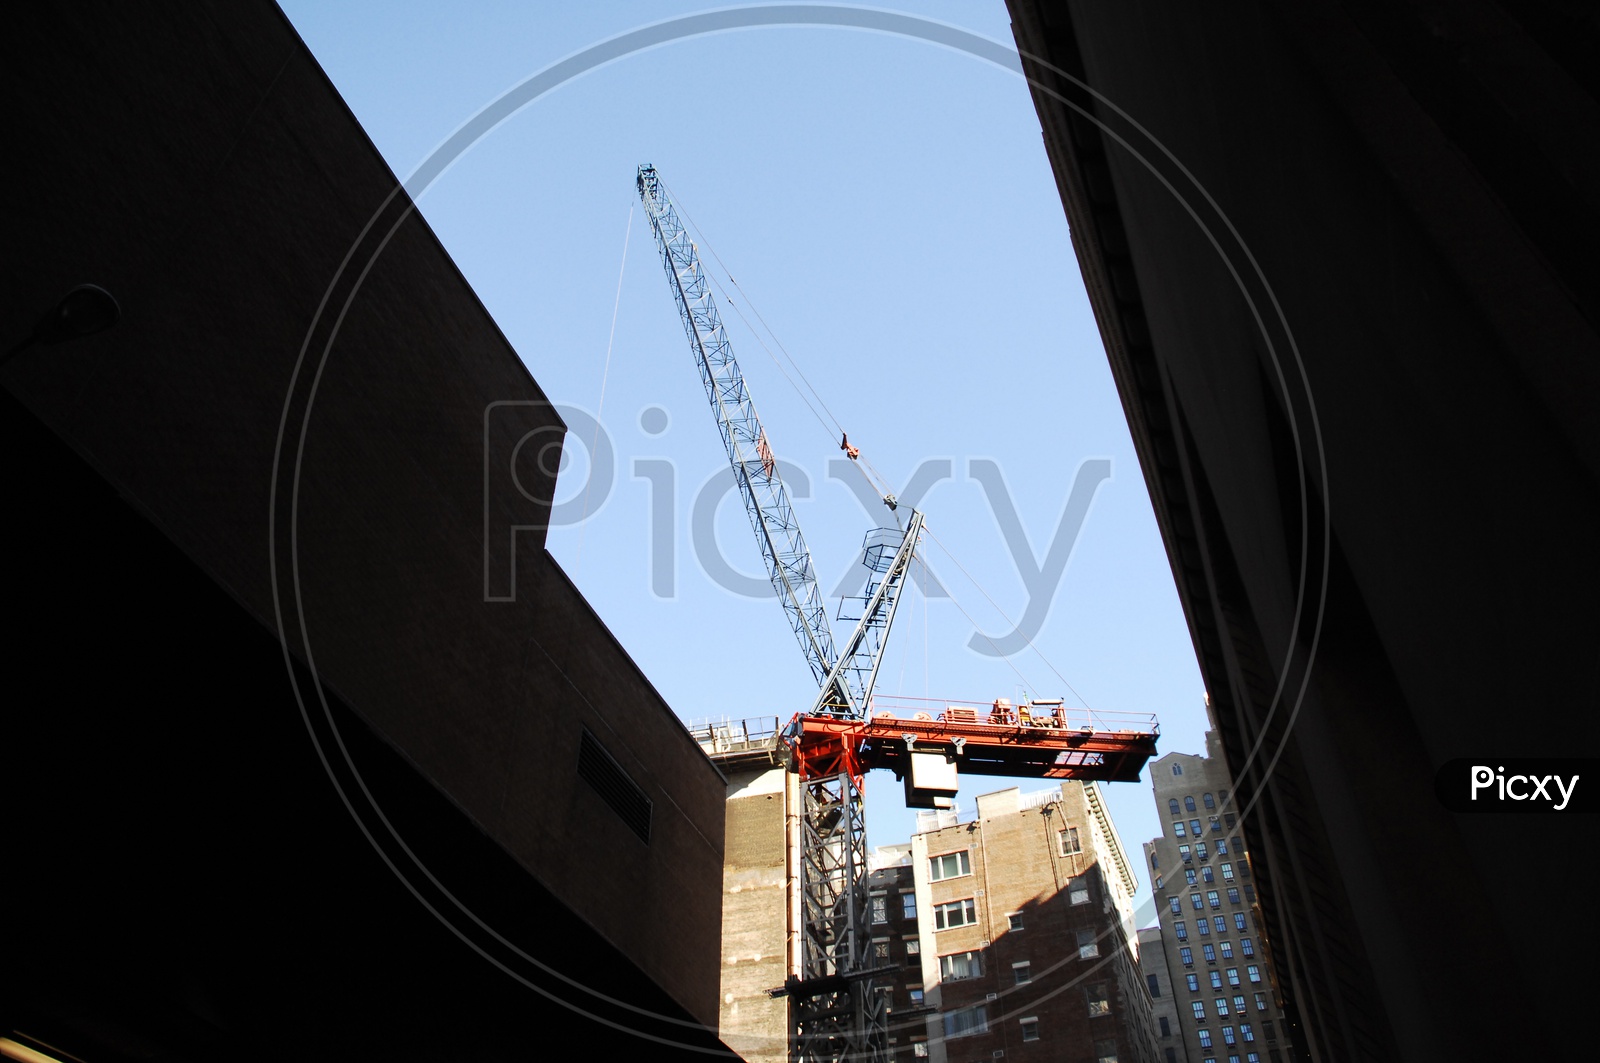 Tower crane alongside the High Rise Buildings with clear sky in background